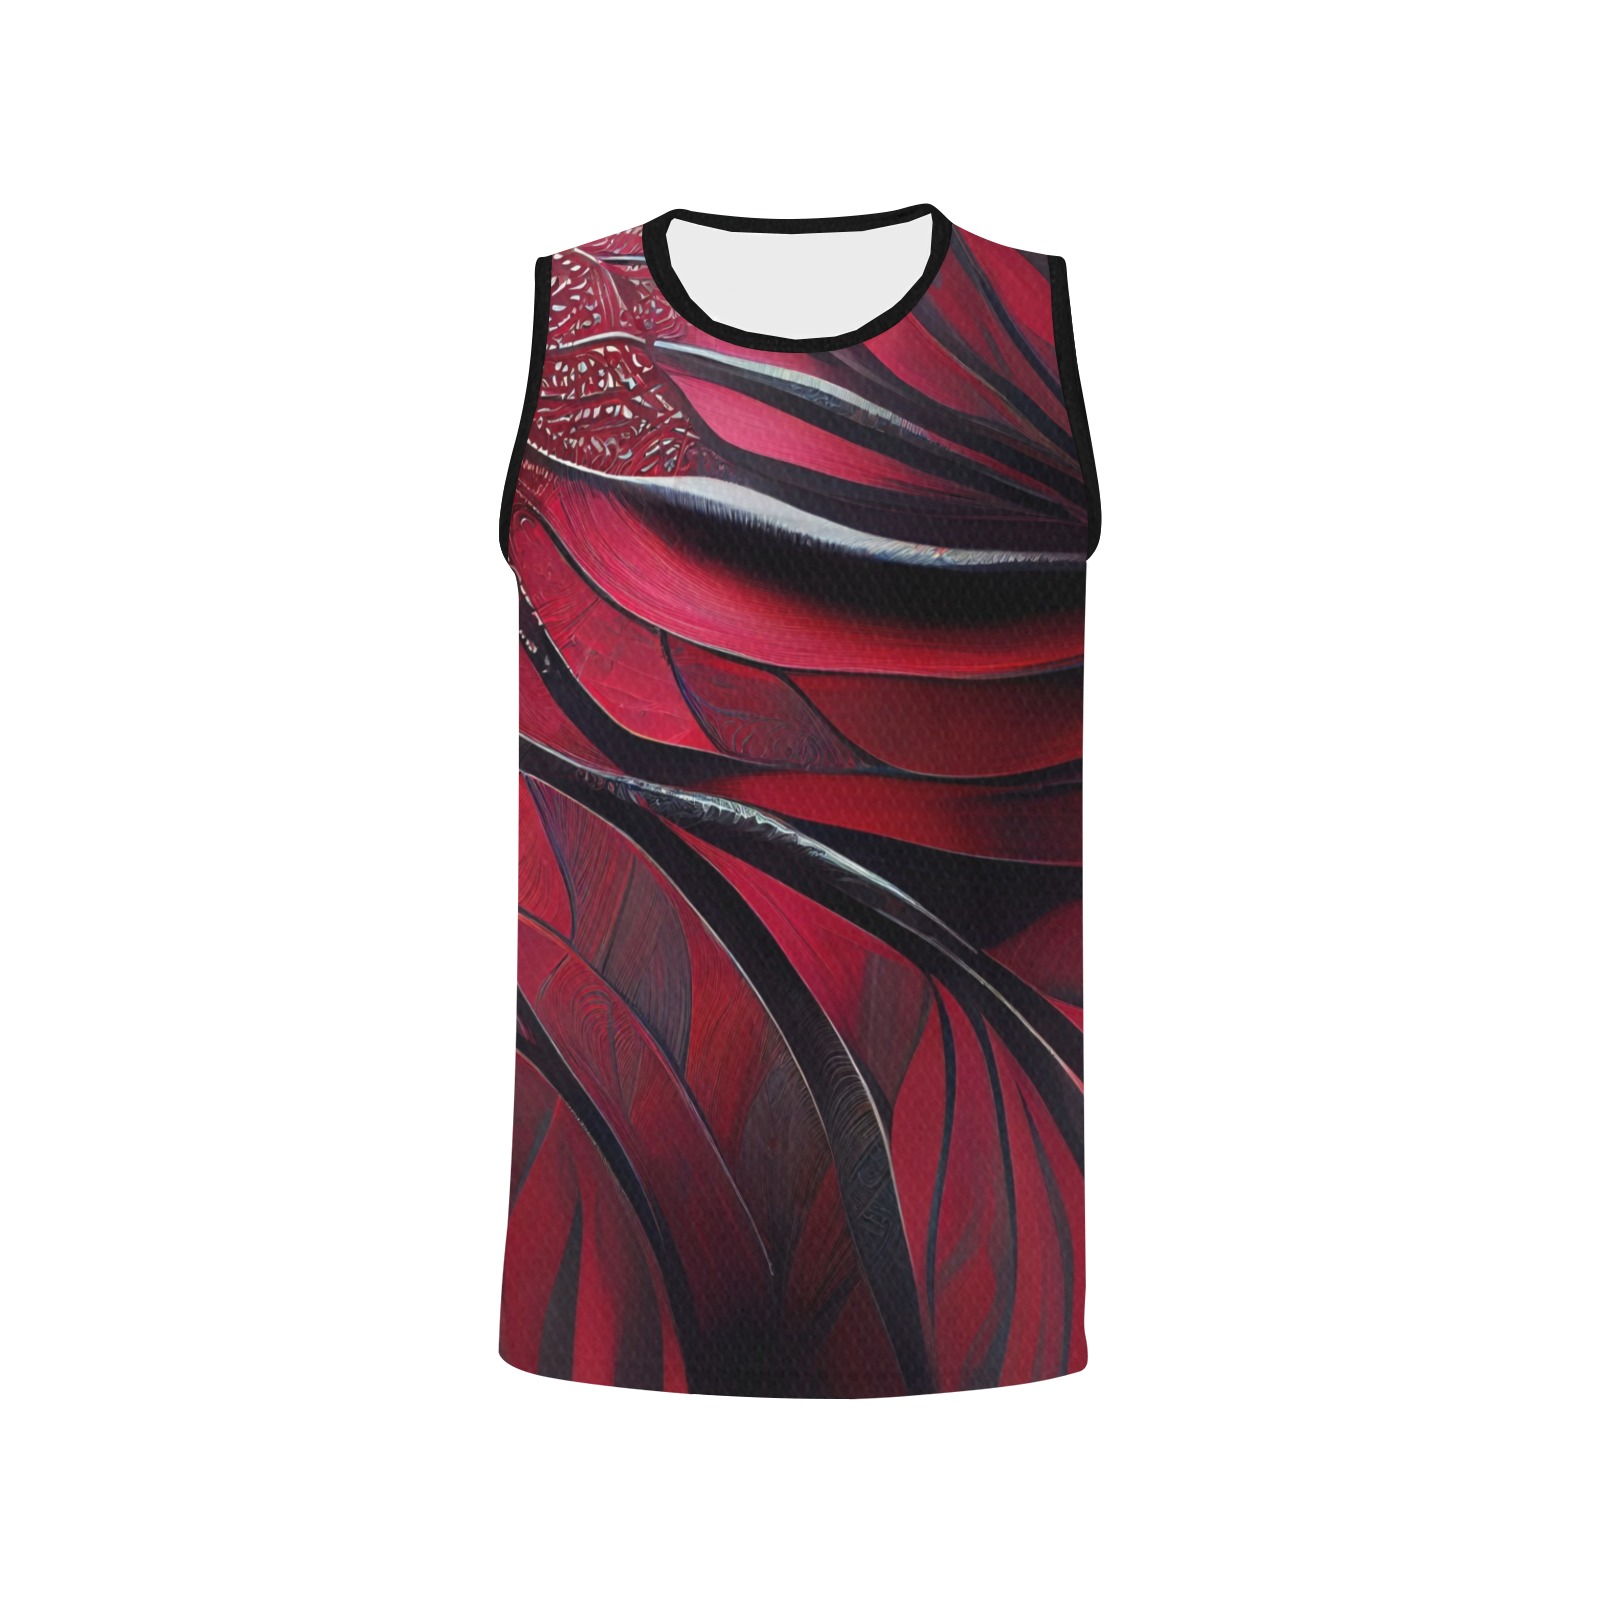 red and black curved pattern 3 All Over Print Basketball Jersey